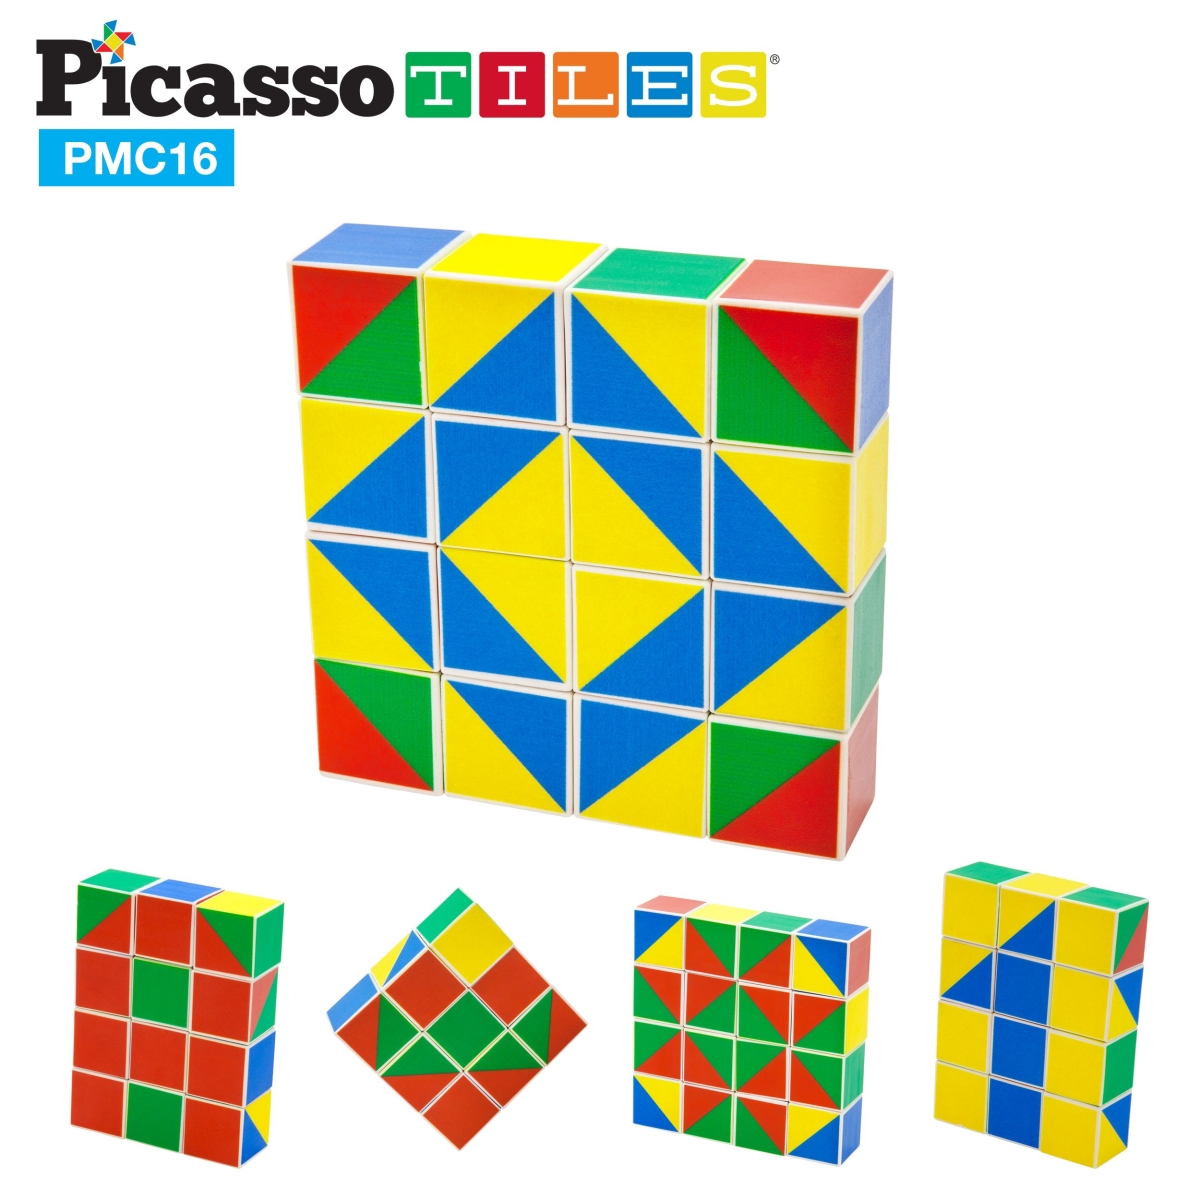 Picture of Picasso Tiles PMC16 Mix and Match 16 Piece Magnetic Puzzle Cube Set Geometry Patterns